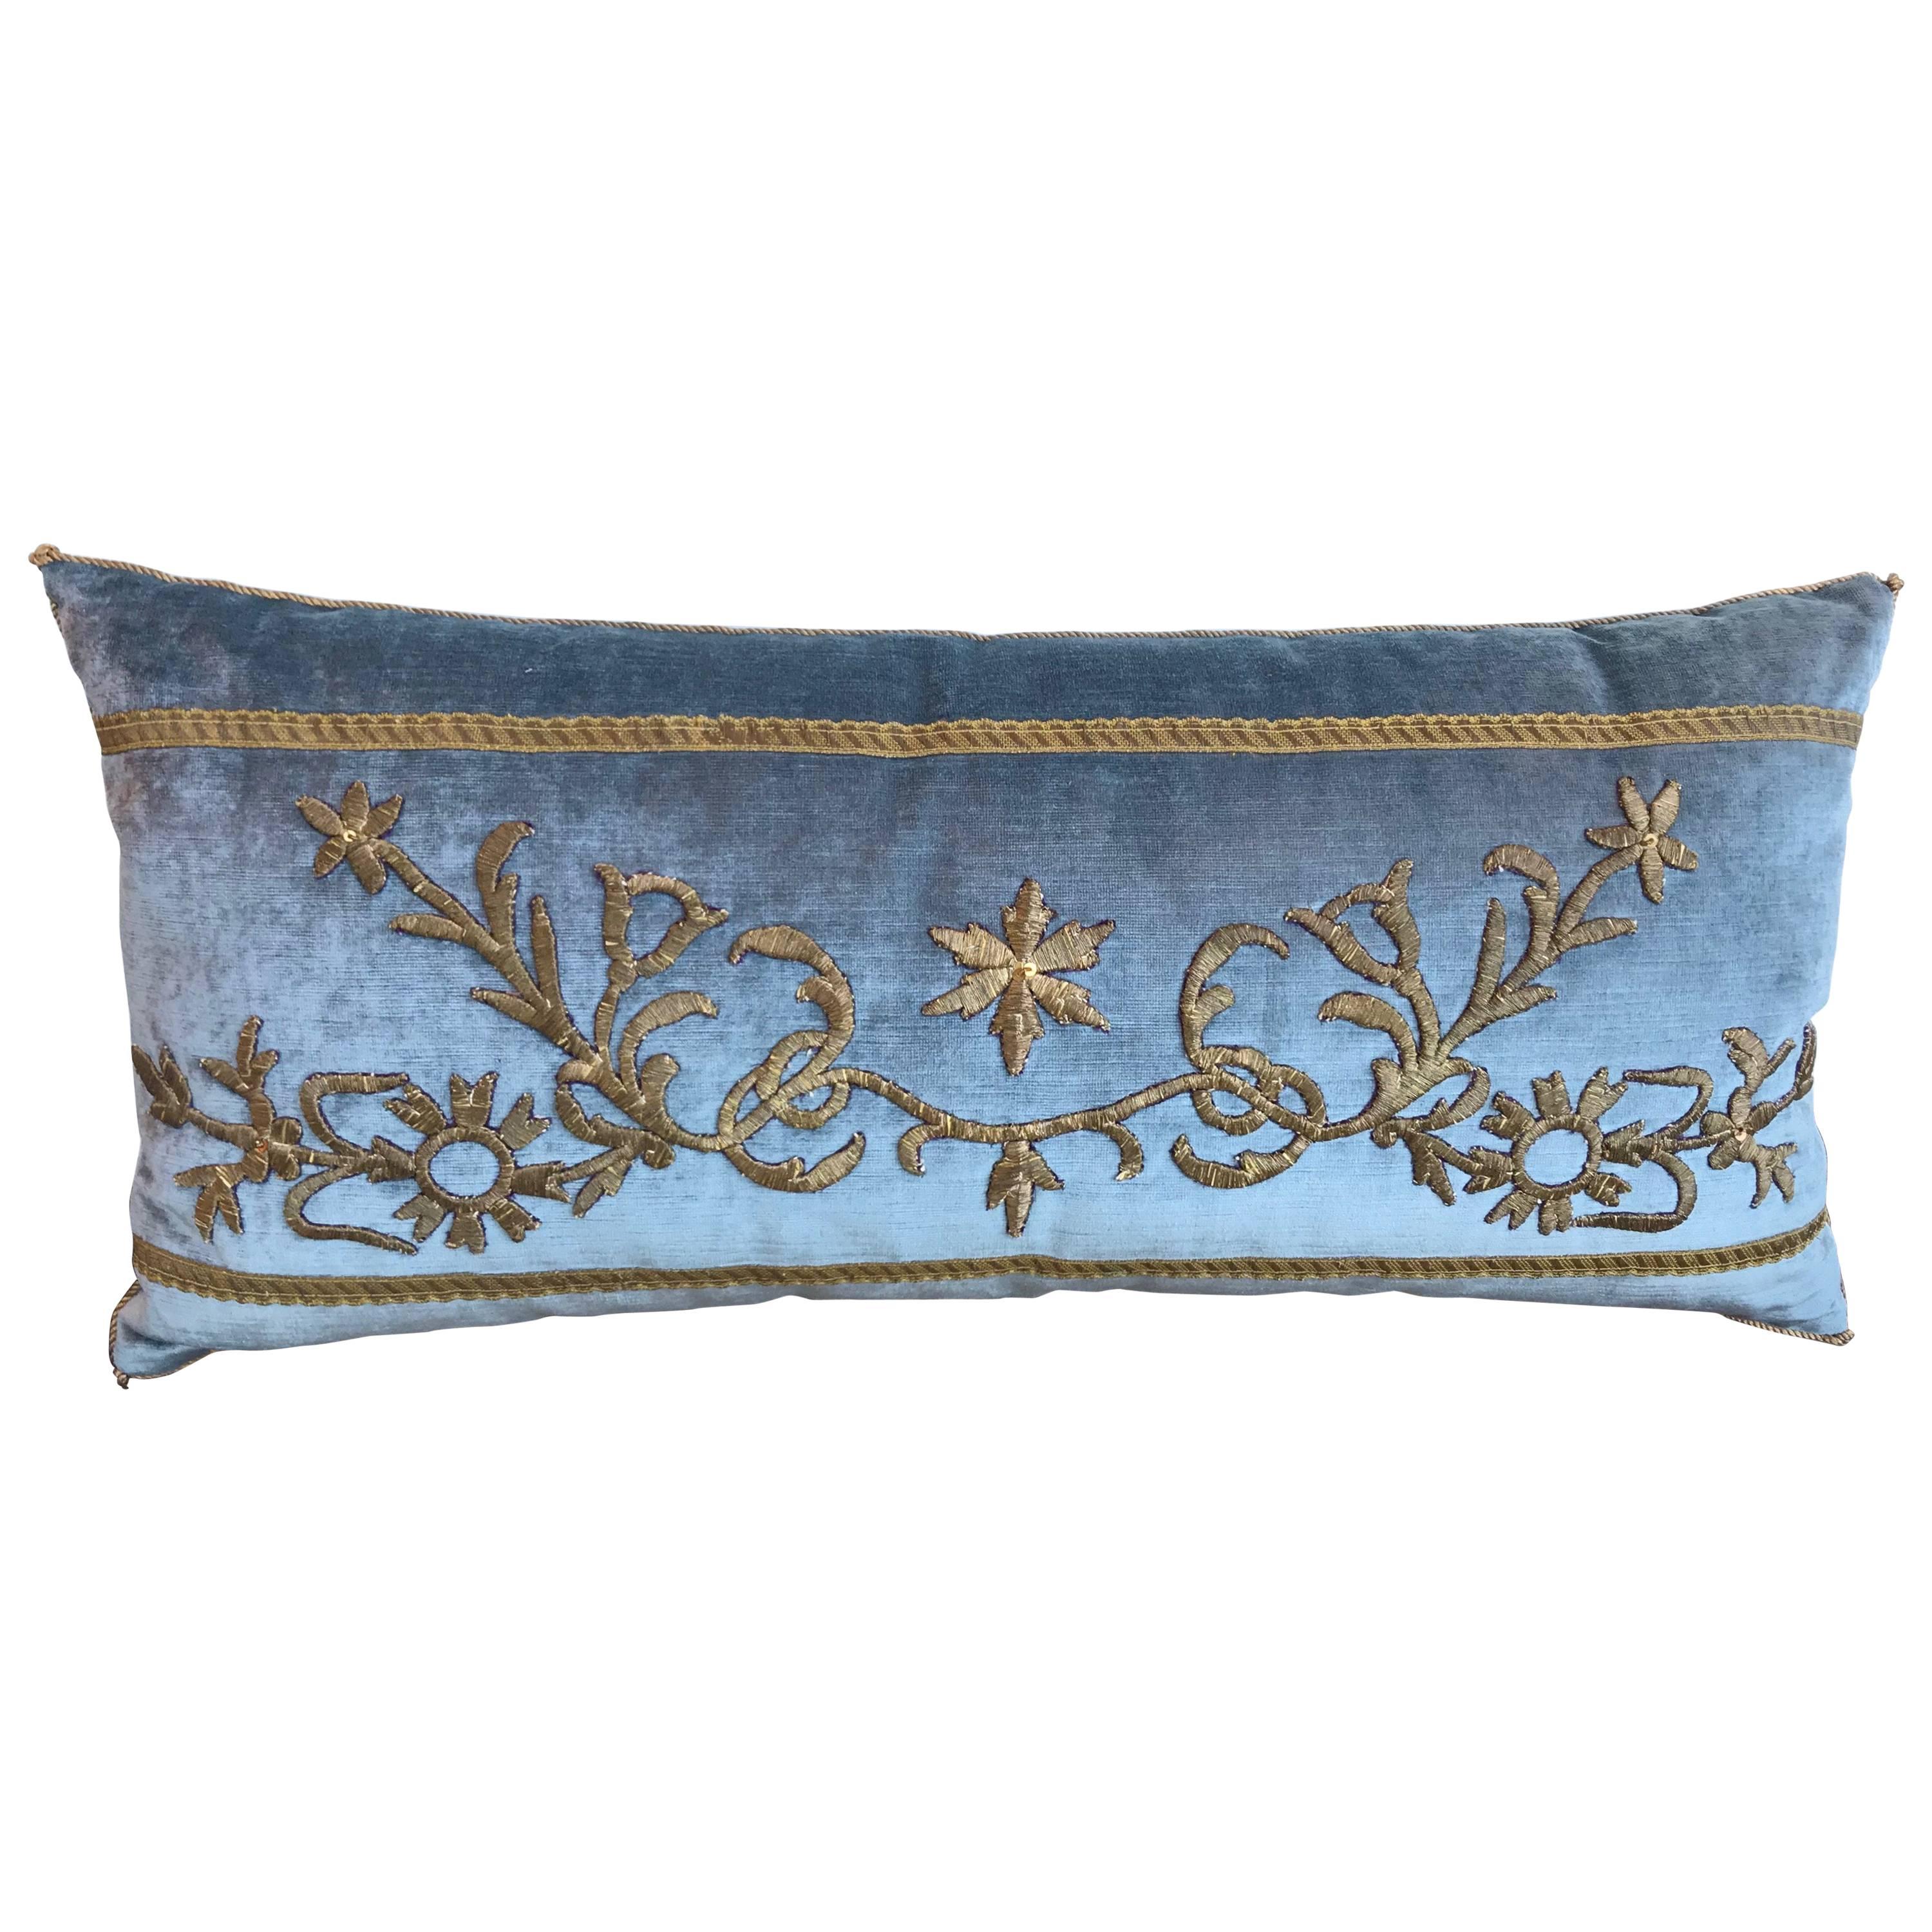 Antique Ottoman Gold Embroidery Pillow